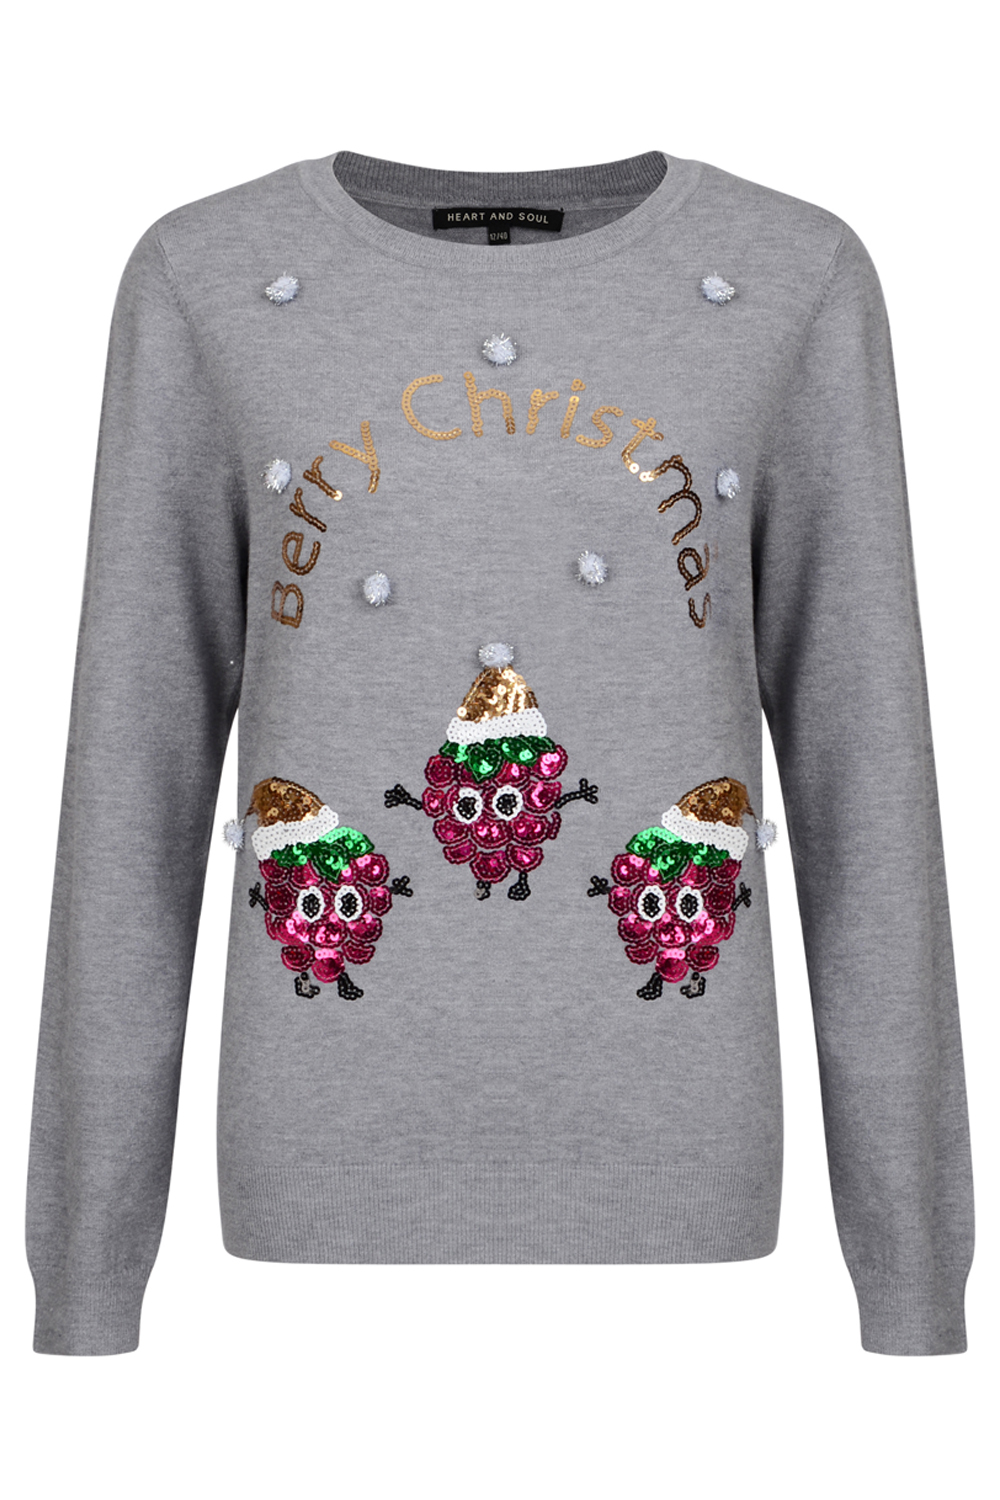 Heart And Soul Womens Sequin Berry Christmas Jumper Ladies Novelty ...